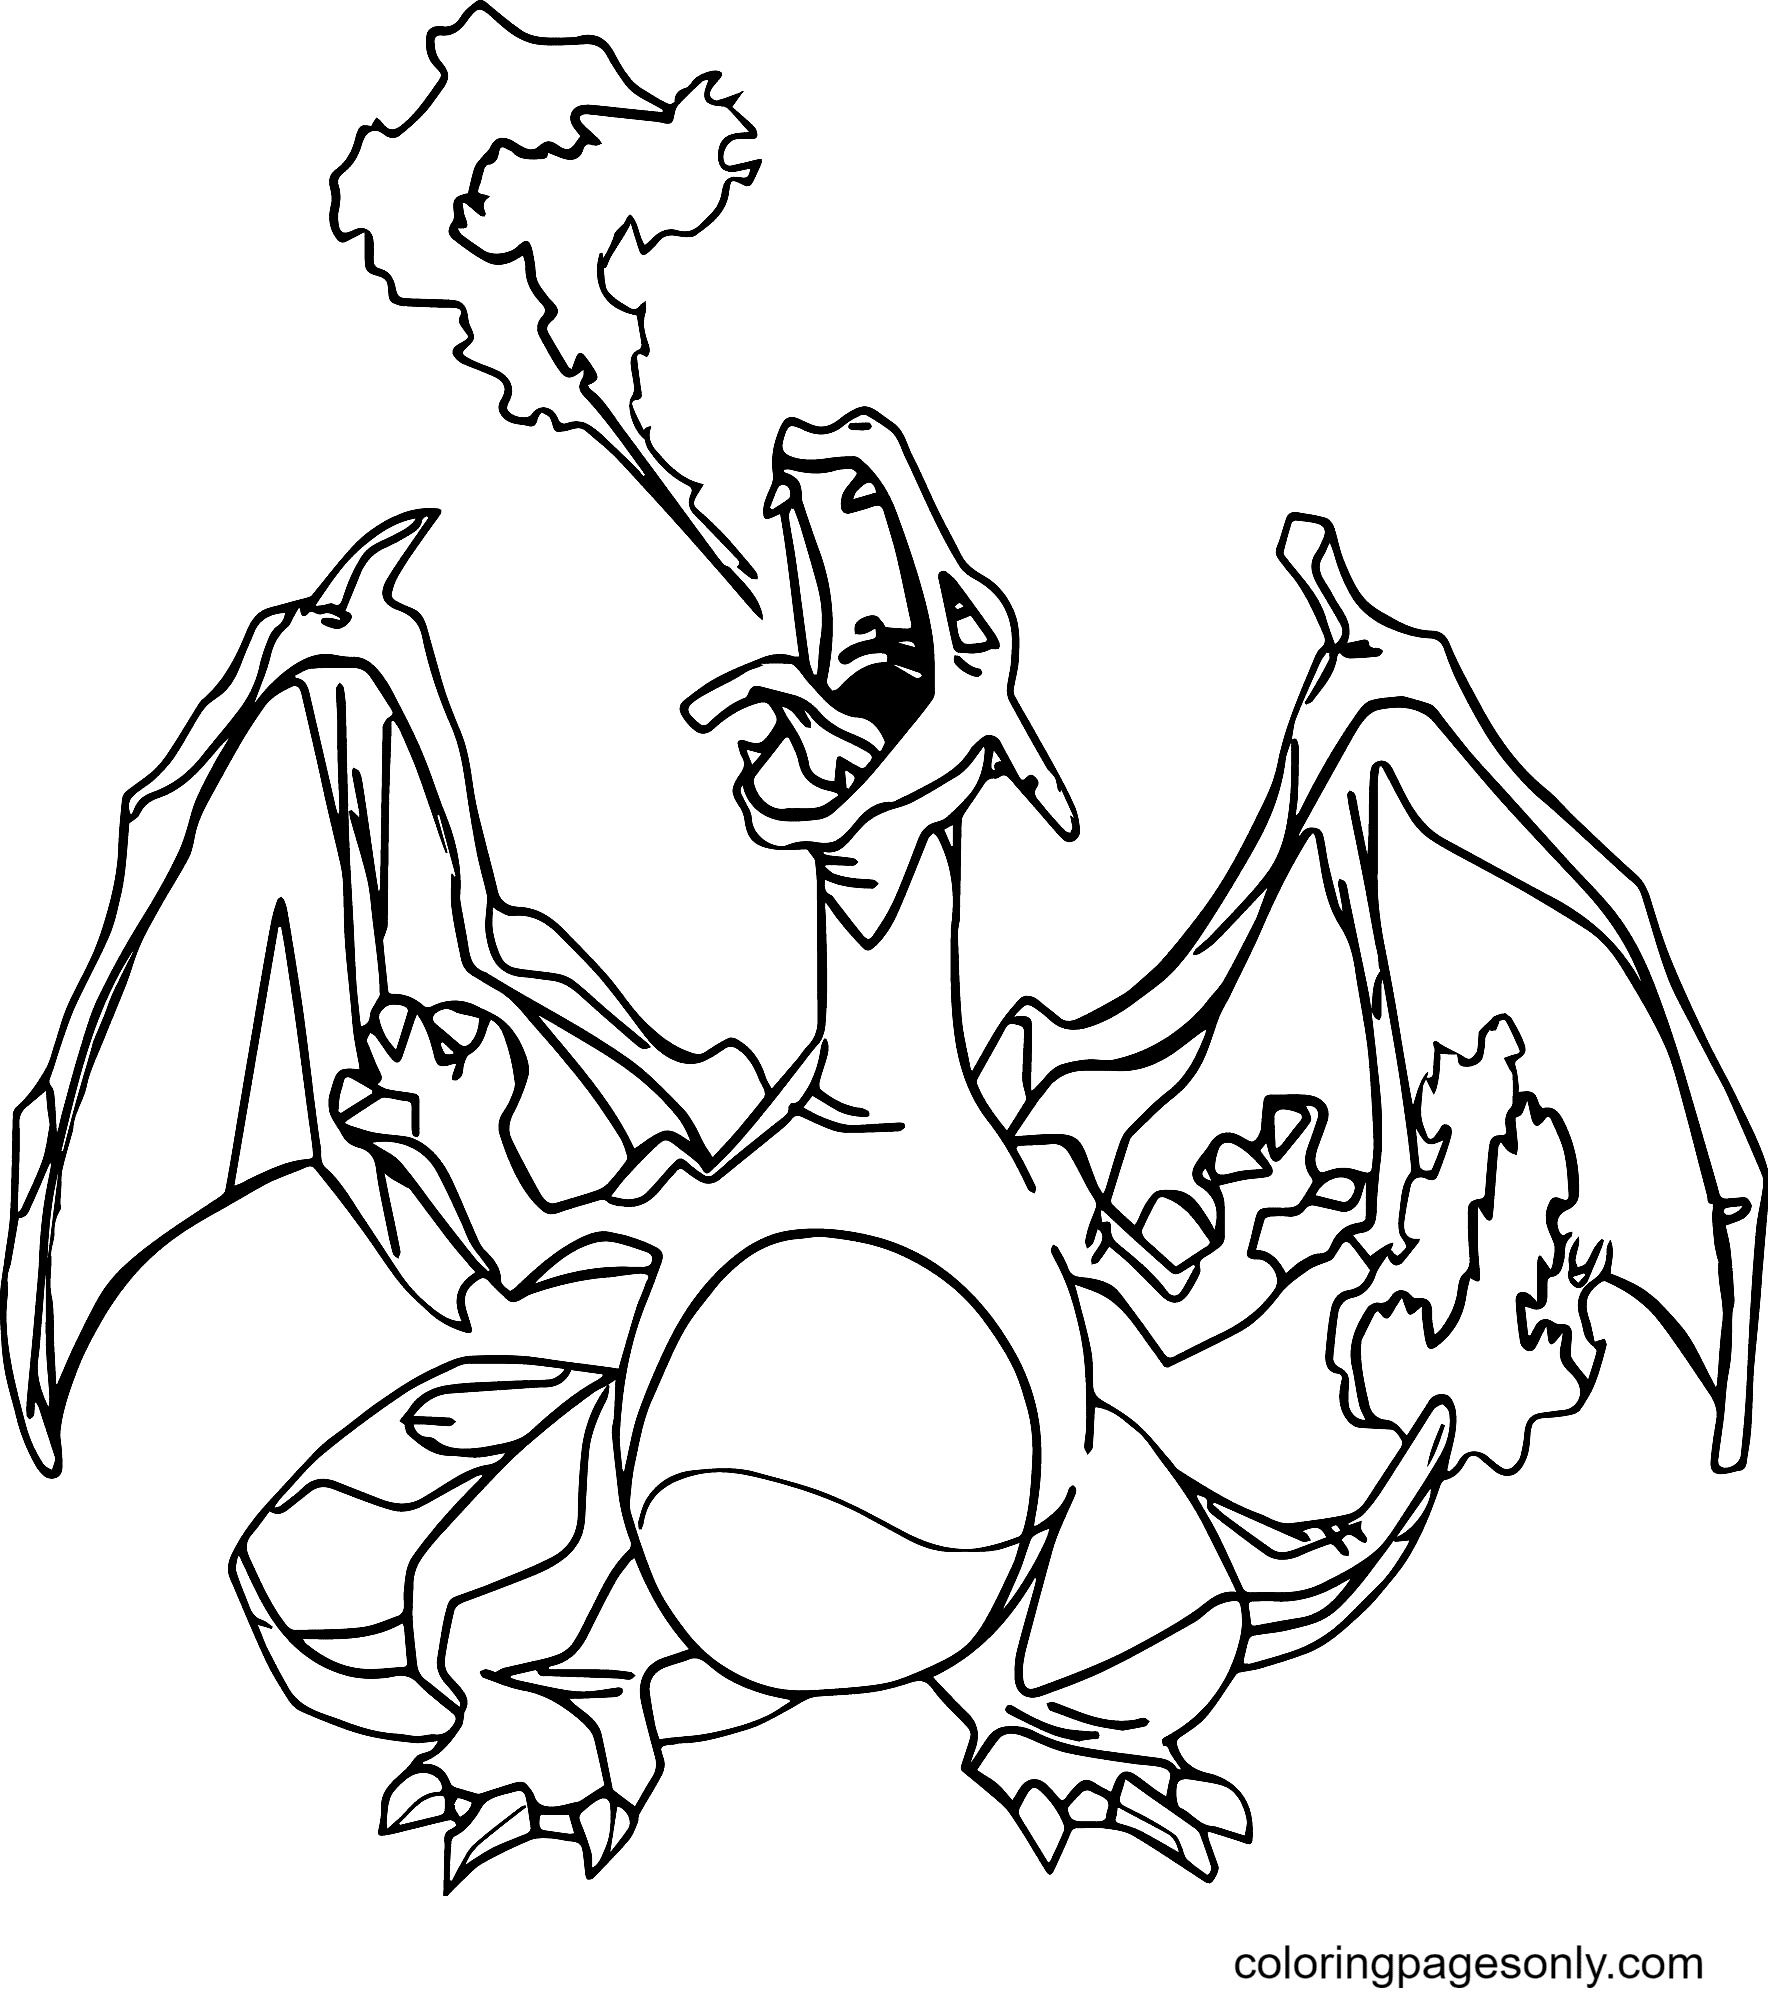 Pokemon Coloring Pages Charizard X (Page 1) - Line.17QQ.com